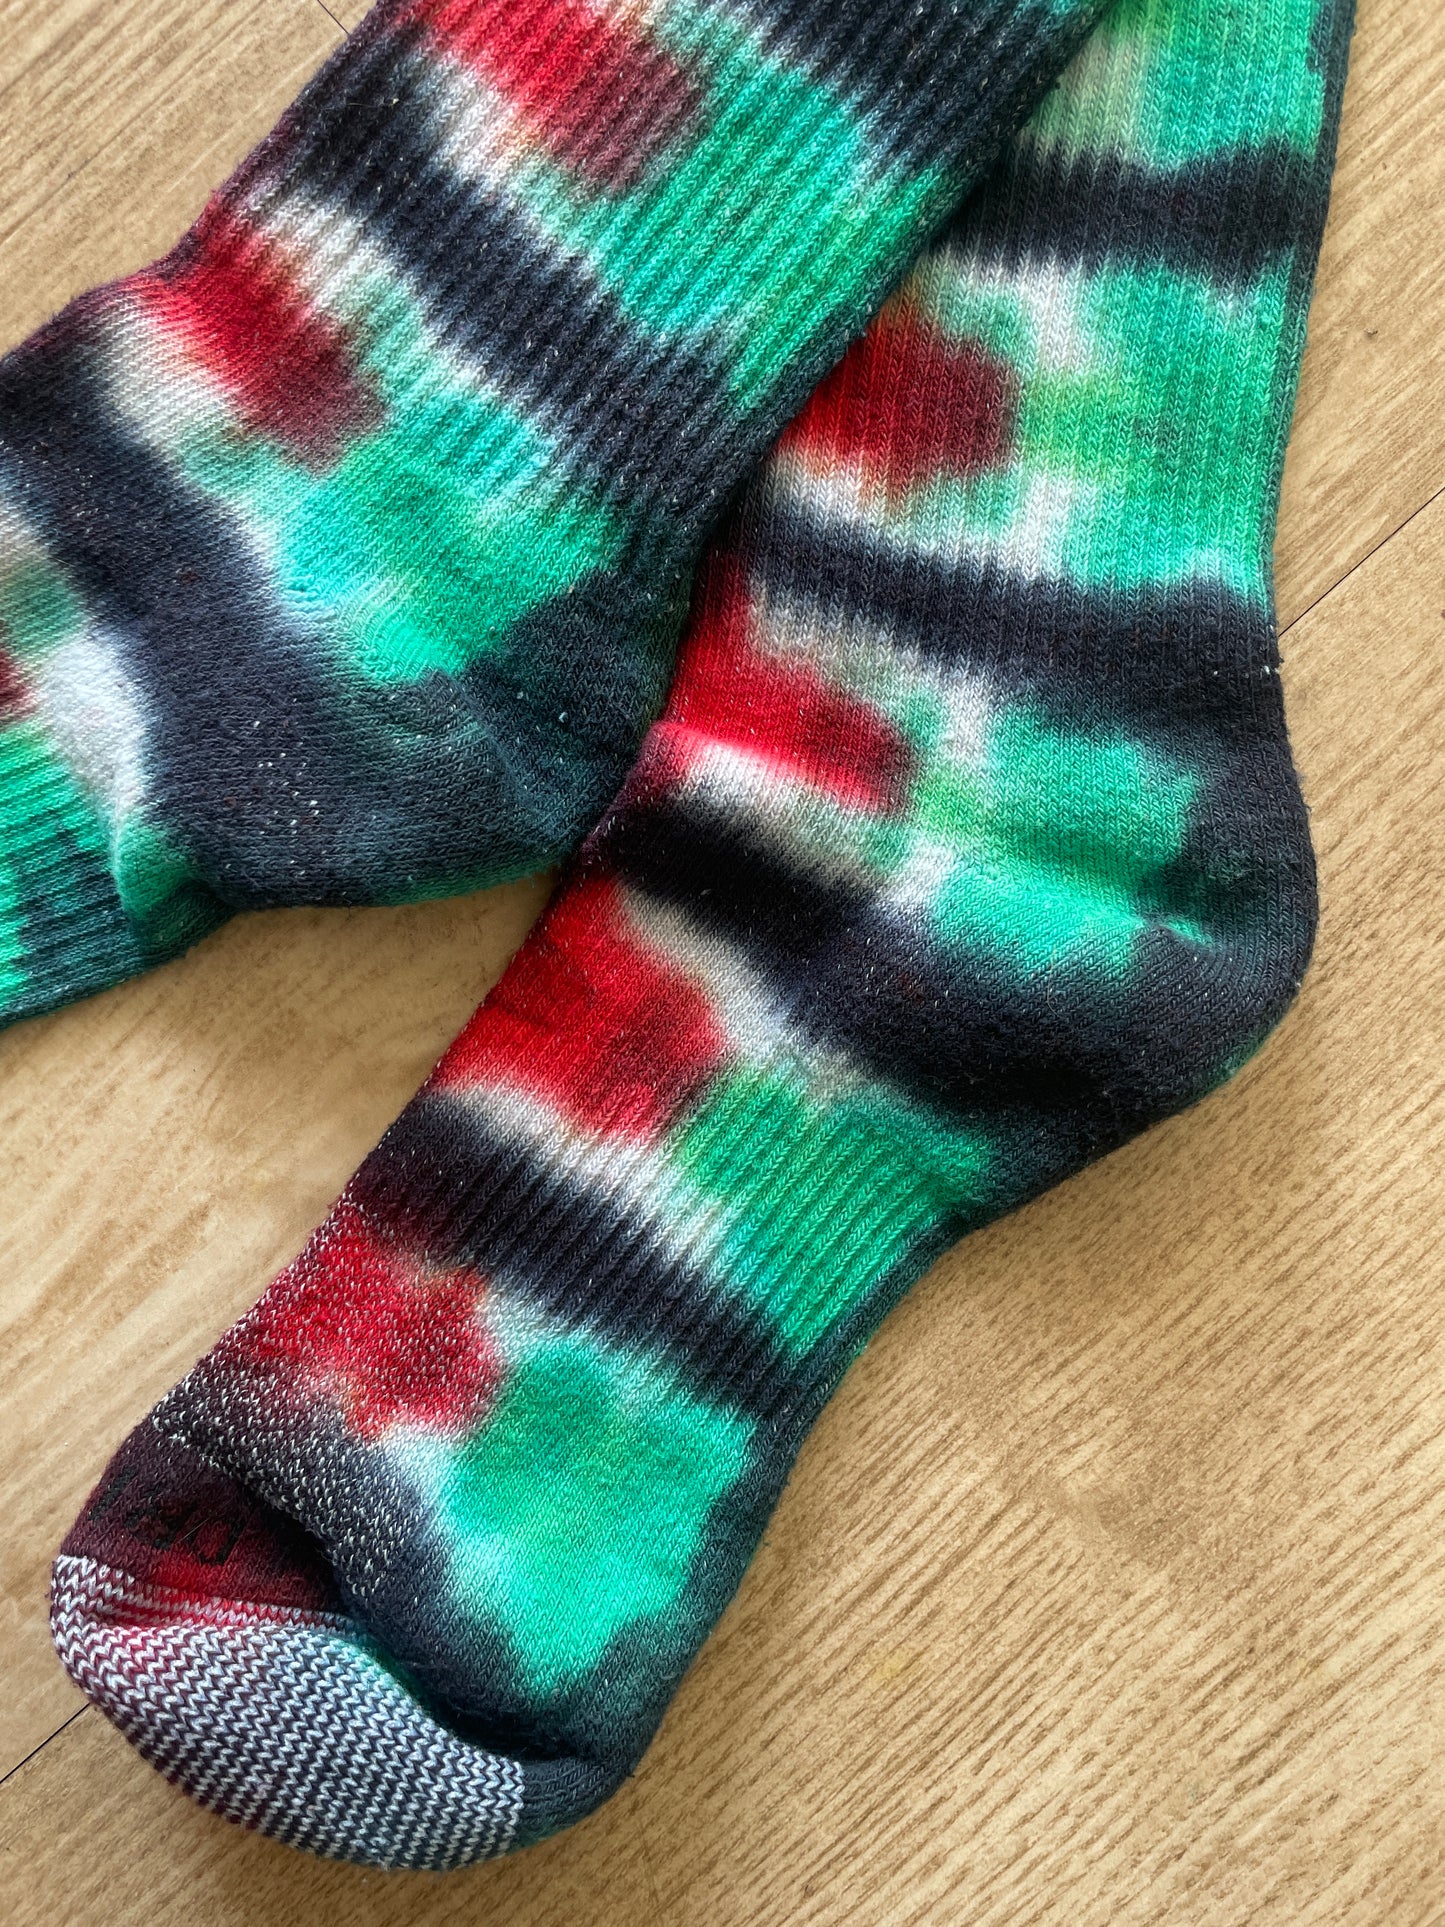 NIKE Christmas Socks Hand Tie Dyed Red, Green, and Black Nike Dri-FIT Everyday Plus Crew Training Socks - Size Large (Men's 8-12/Women's 10-13)